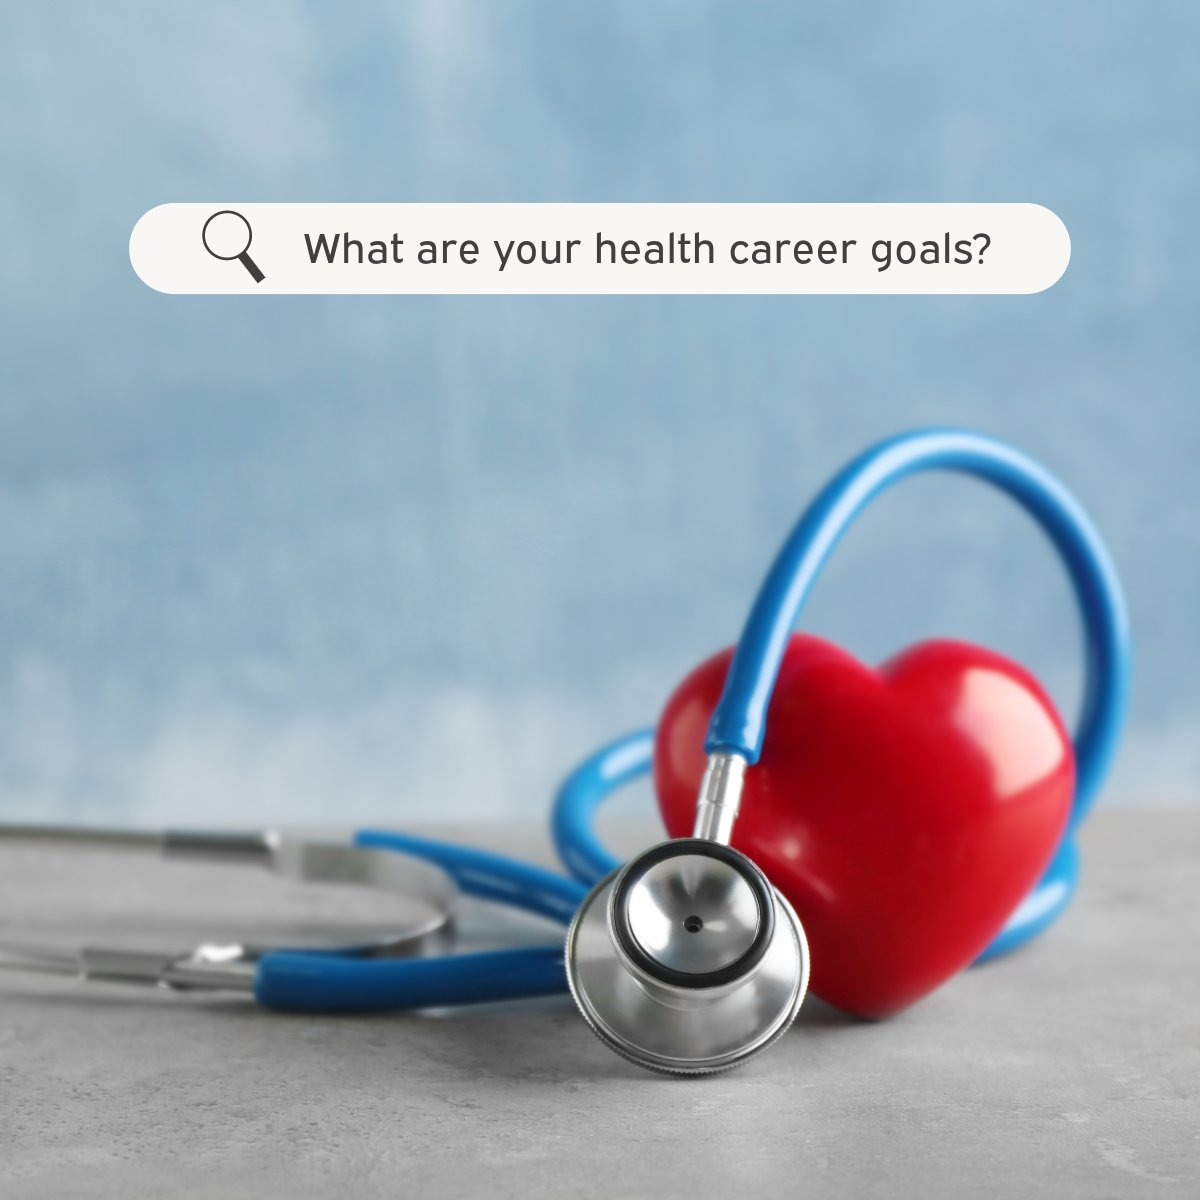 Comment your health career goals.  Let's celebrate the new year and make resolutions based on these goals! #prehealth #premed #premedical #predental #preoptometry #preveterinary #prenursing #prephysicianassistant